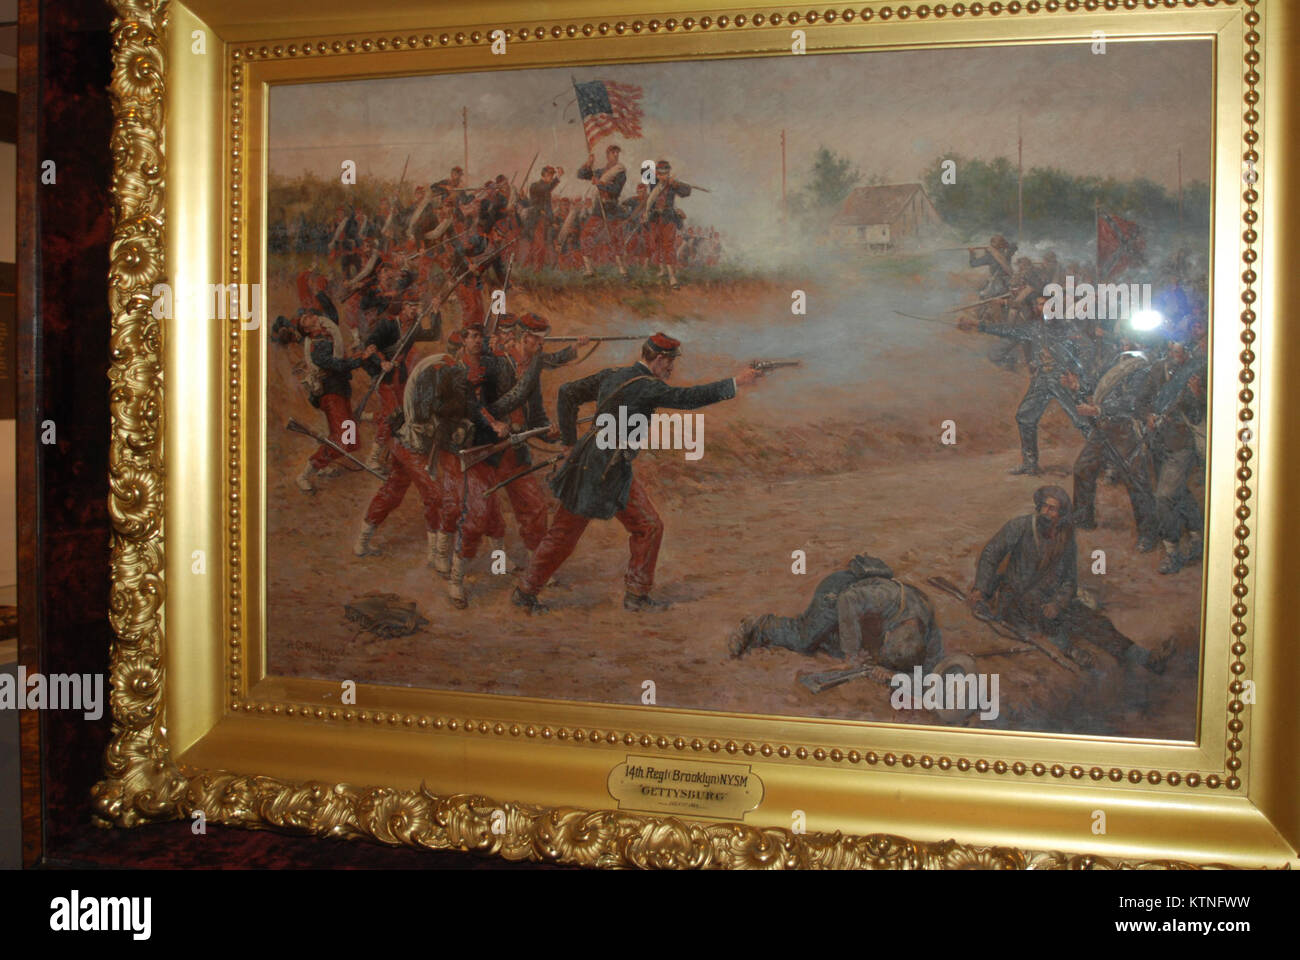 SARATOGA SPRINGS-- This painting depicts members of the 14th Regiment of the New York State Militia engaging members of the Army of Northern Virginia during the first day of the Battle of Gettysburg on 1 July 1863. The painting is among the items in the new Civil War exhibit at the New York State Military Museum which was officially opened on Saturday, July 27. (Eric Durr/ DMNA) Stock Photo